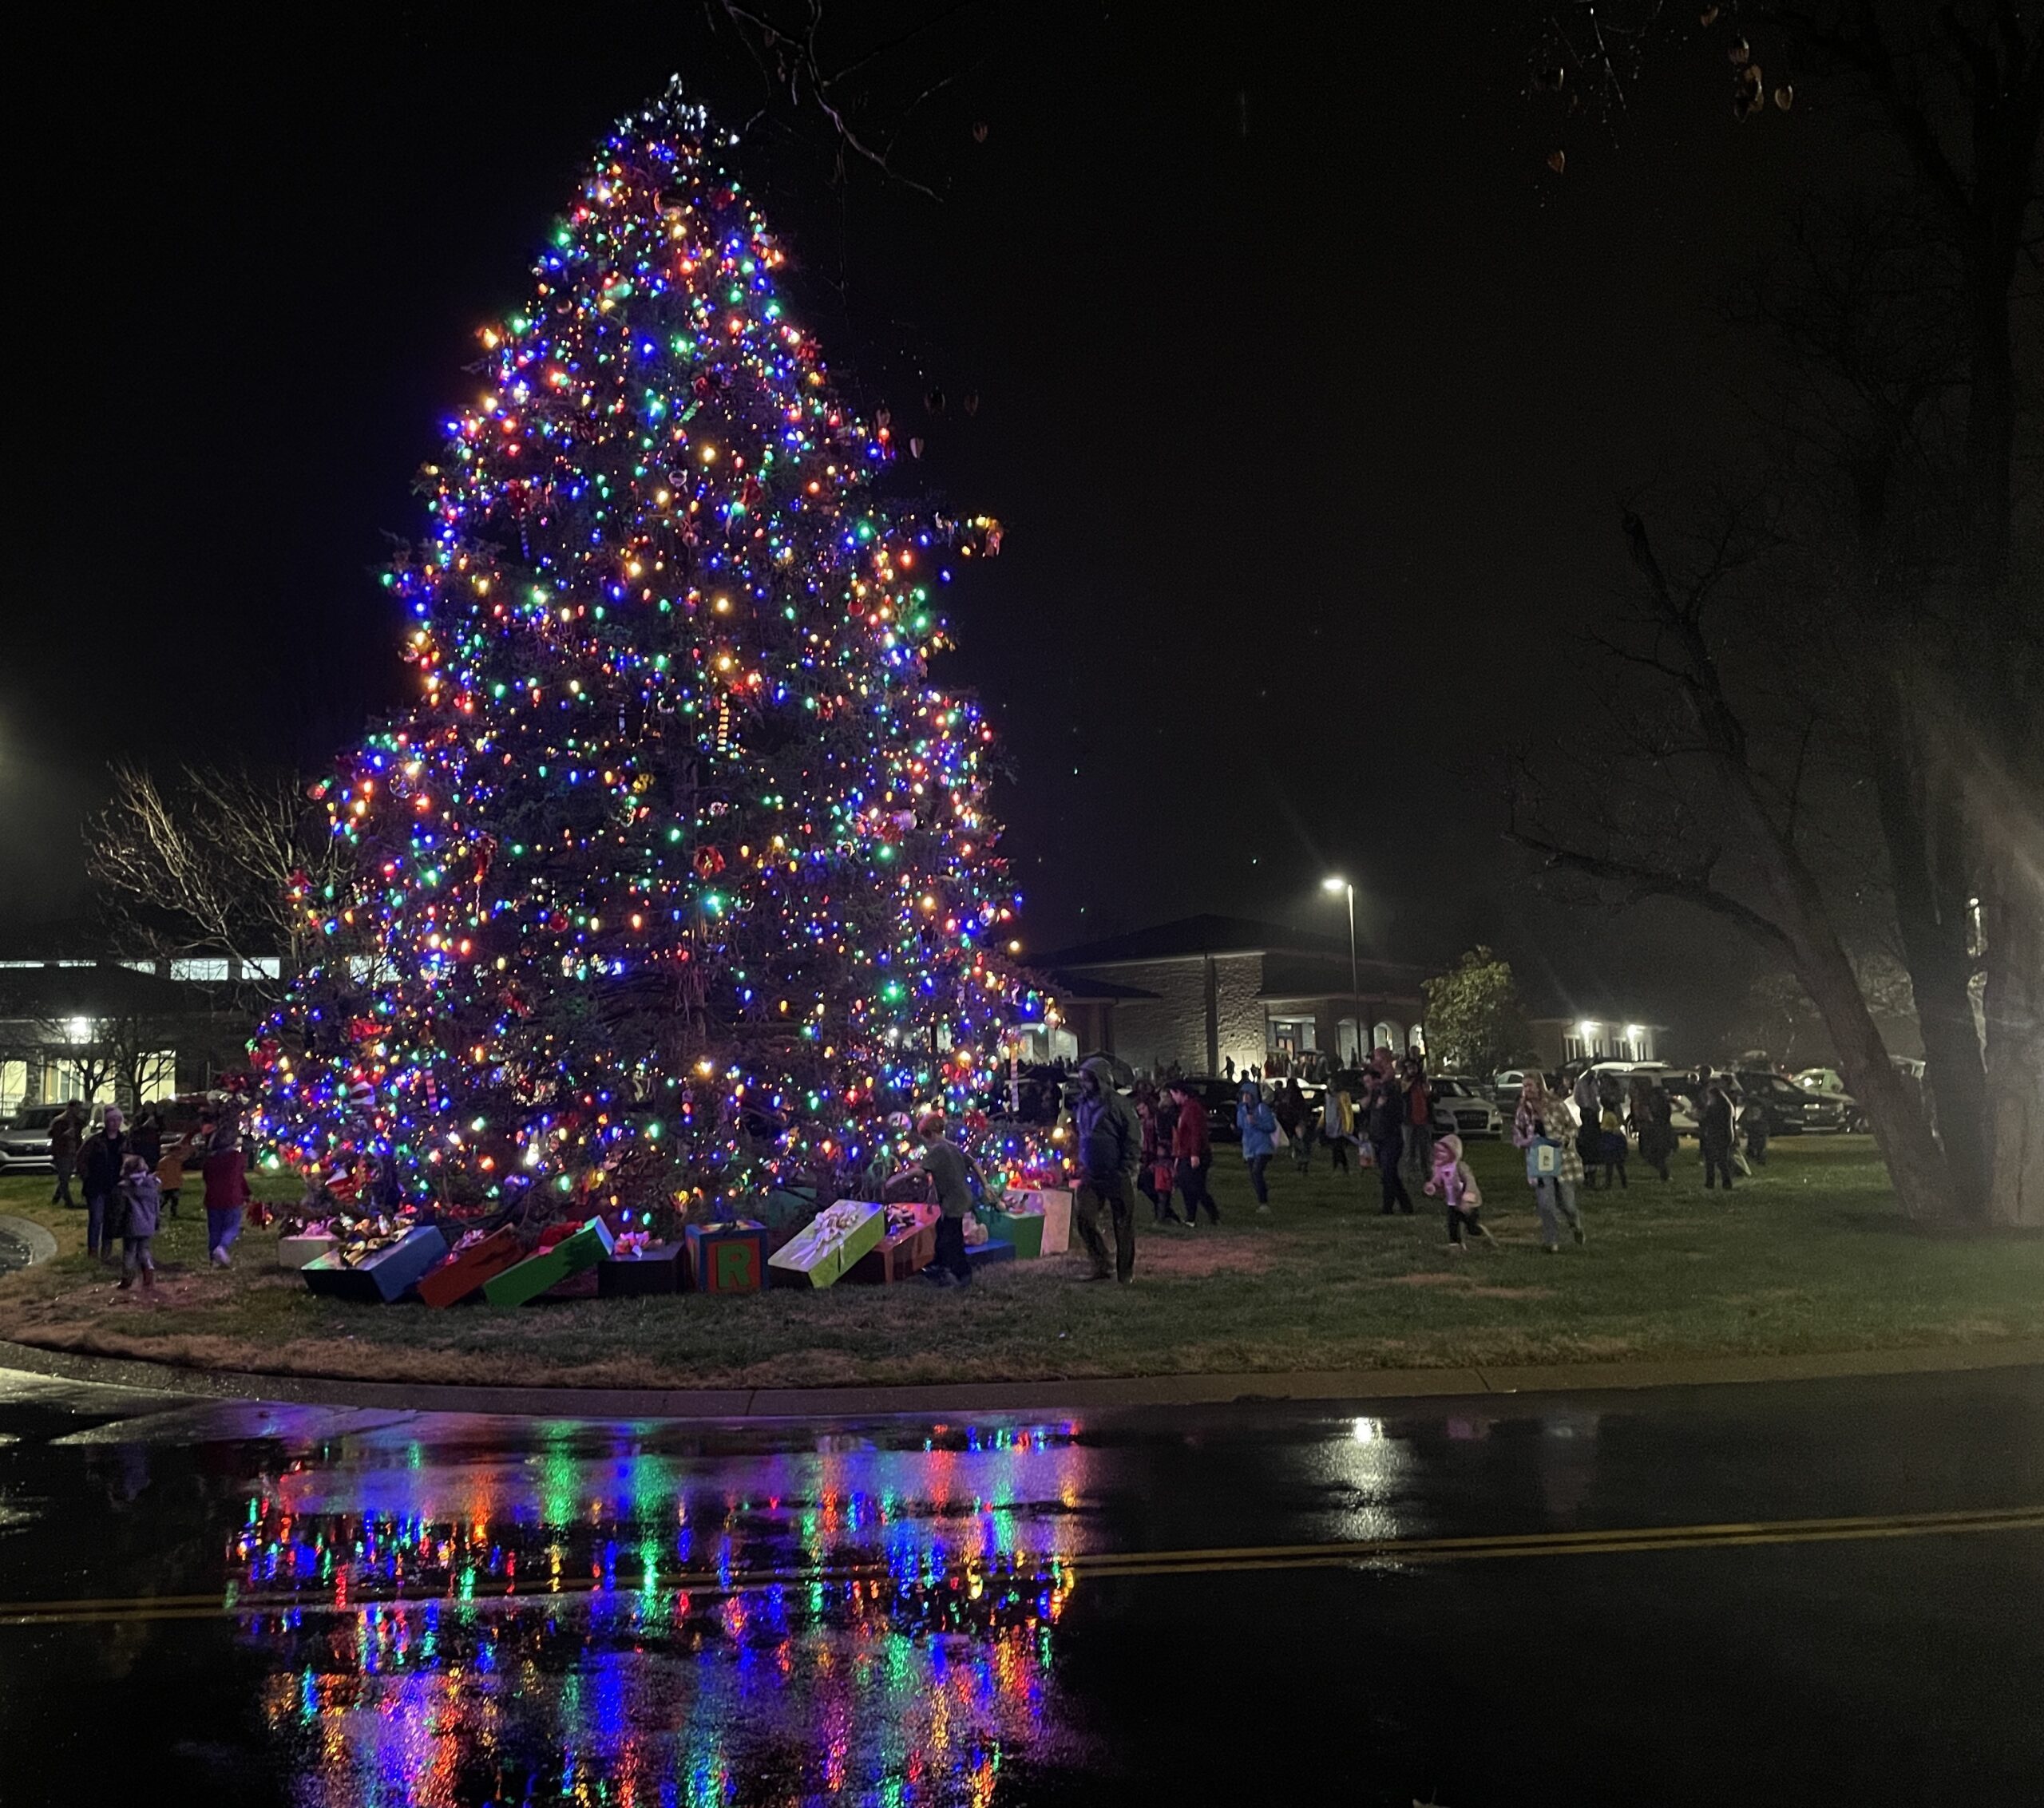 Brighten Brentwood - Annual Christmas Tree Lighting & Holiday Celebration in Brentwood TN.